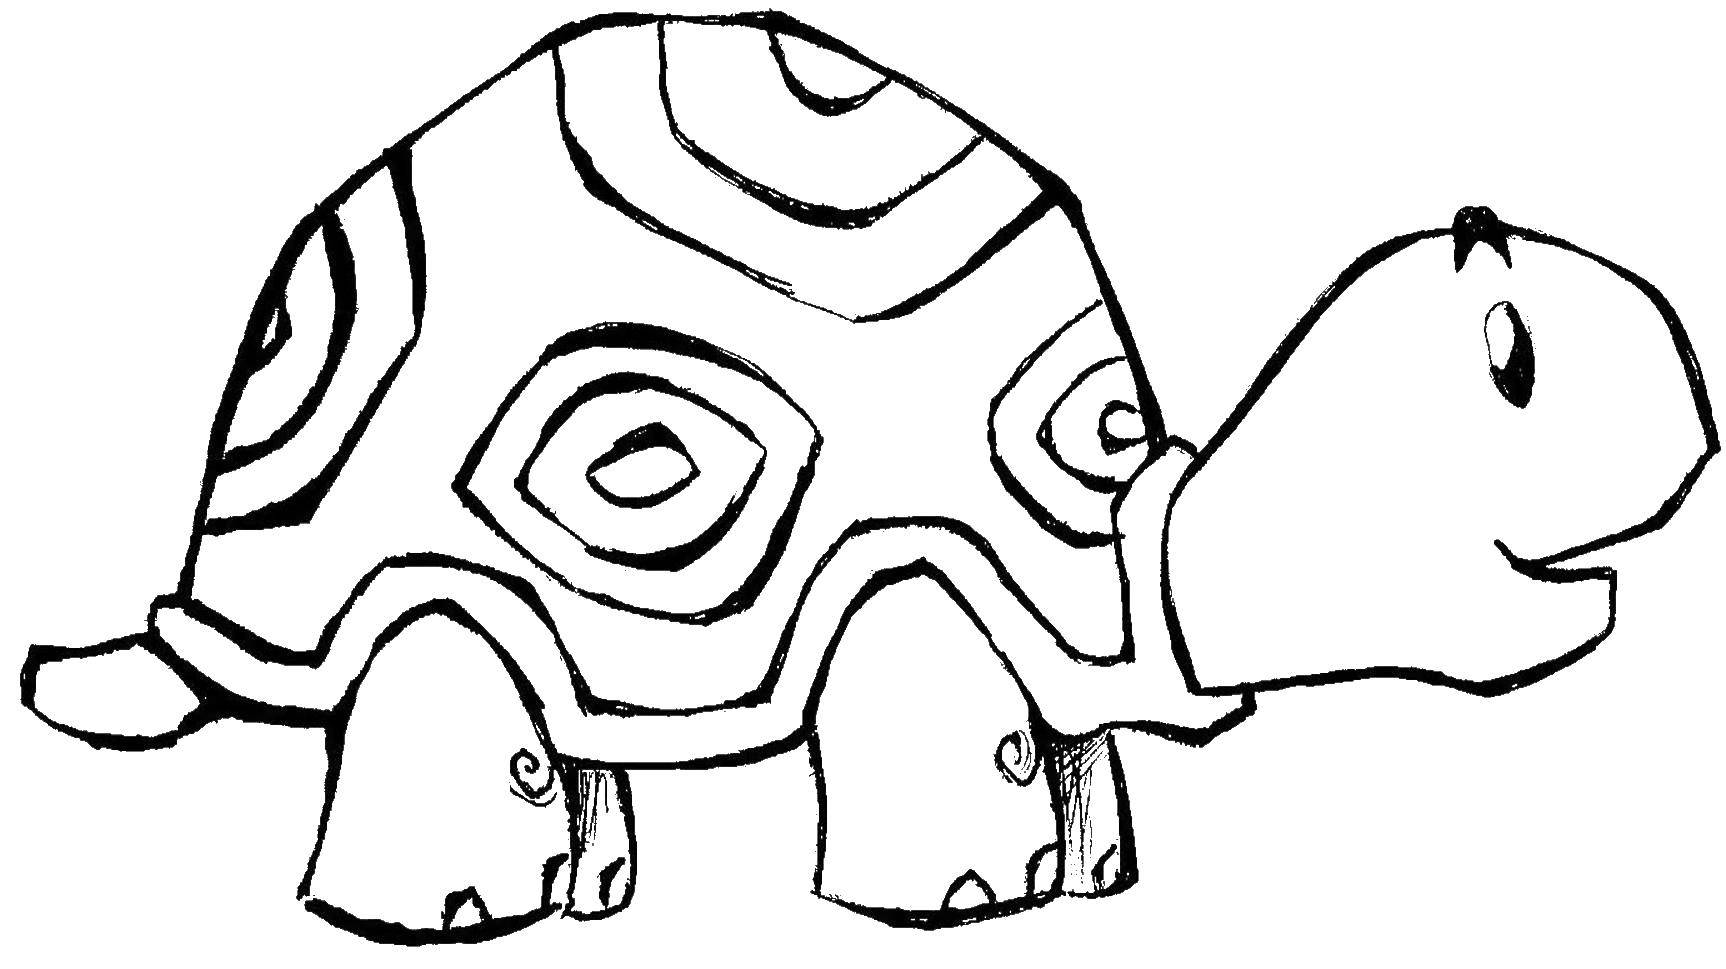 Coloring Turtle. Category animals. Tags:  Turtle.